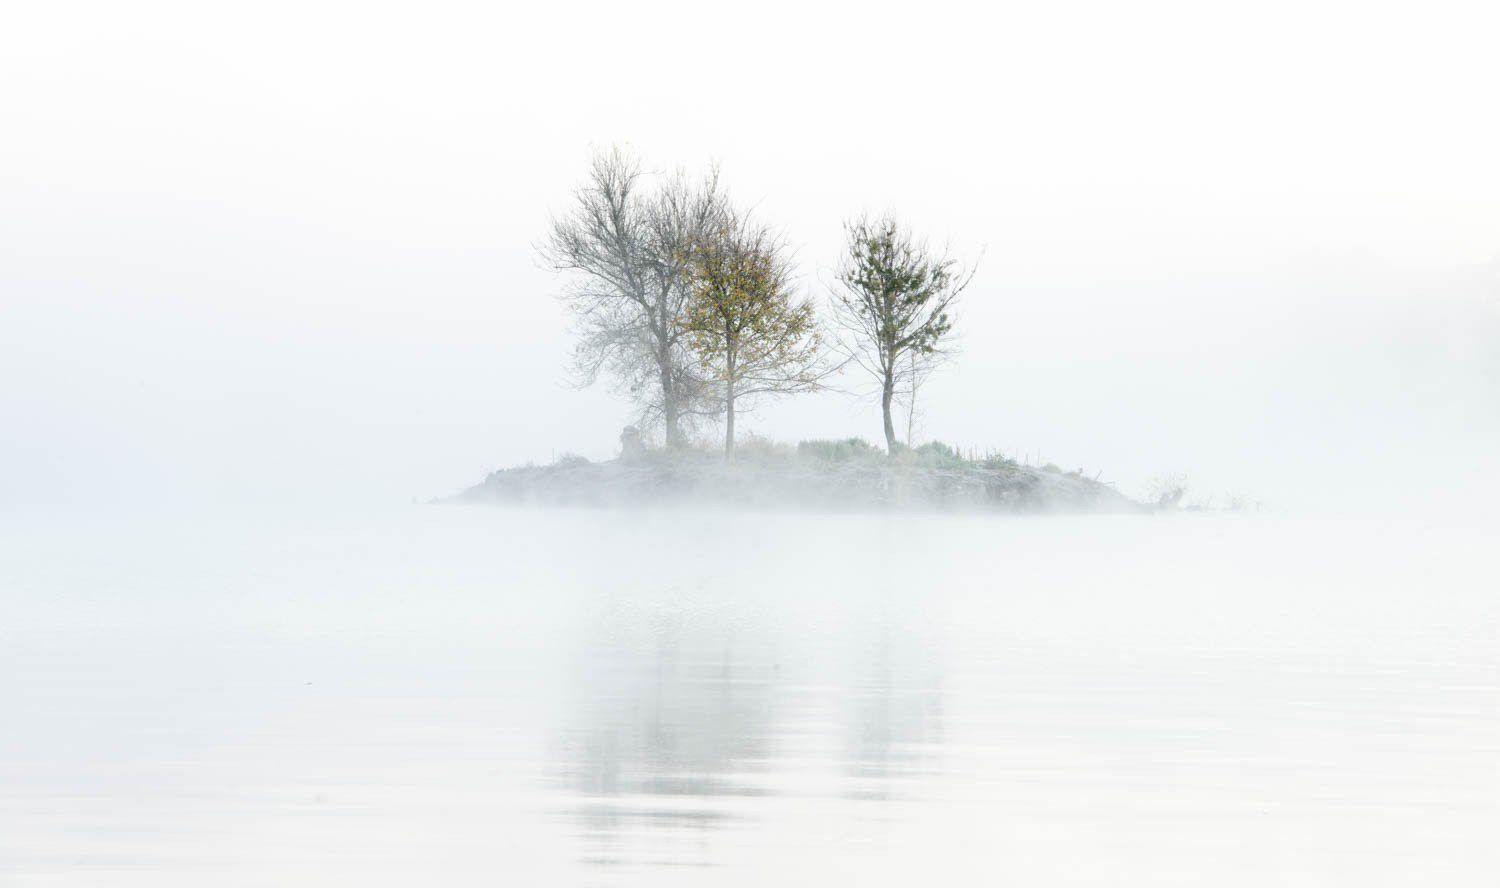 A small island with three trees on it, a foggy effect in the picture, Island in the Mist - Lake Burley Griffin AC